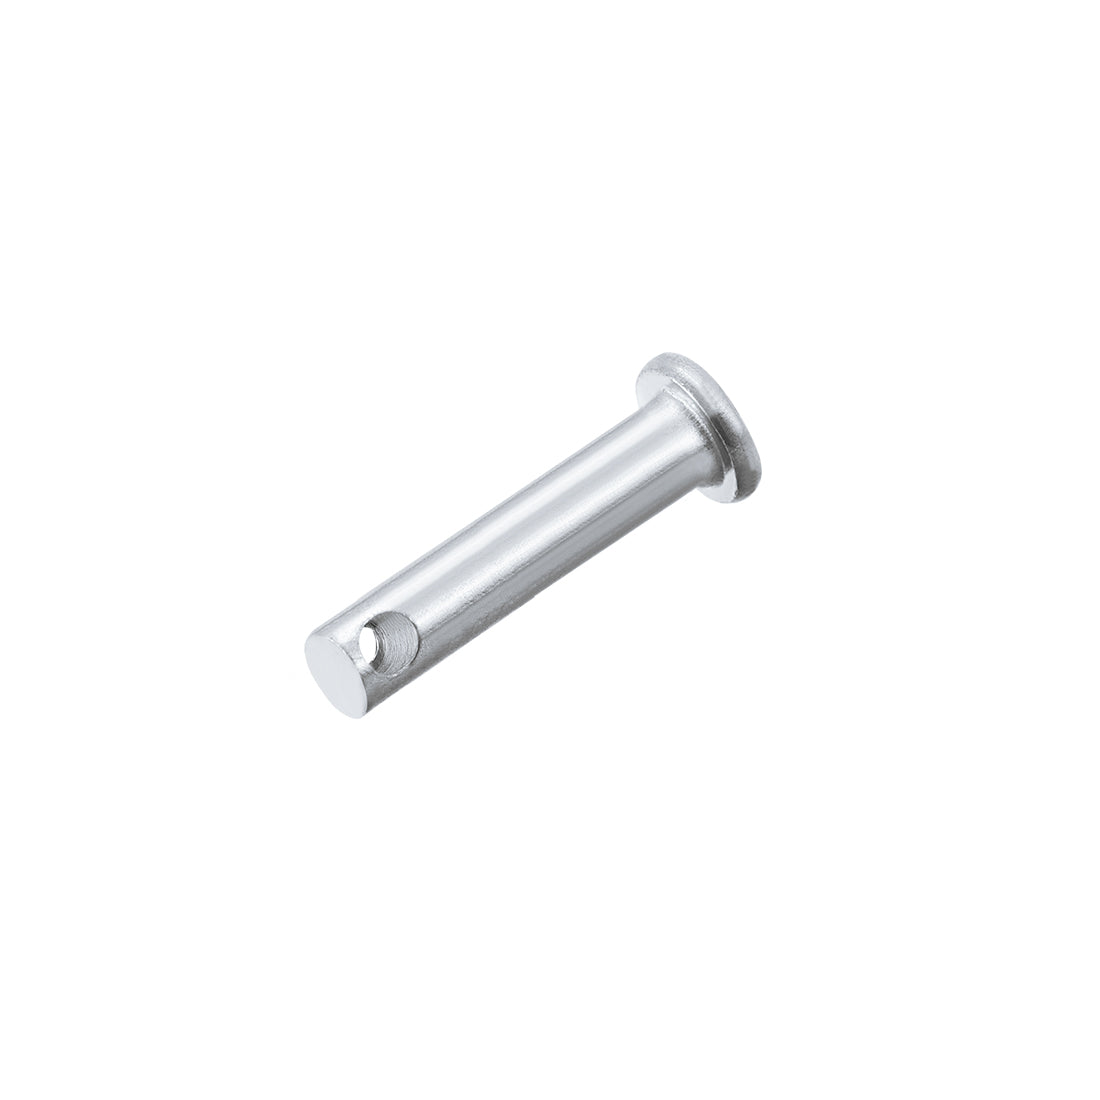 Uxcell Uxcell Single Hole Clevis Pins - 6mm X 60mm Flat Head Zinc-Plating Solid Steel Link Hinge Pin 30Pcs